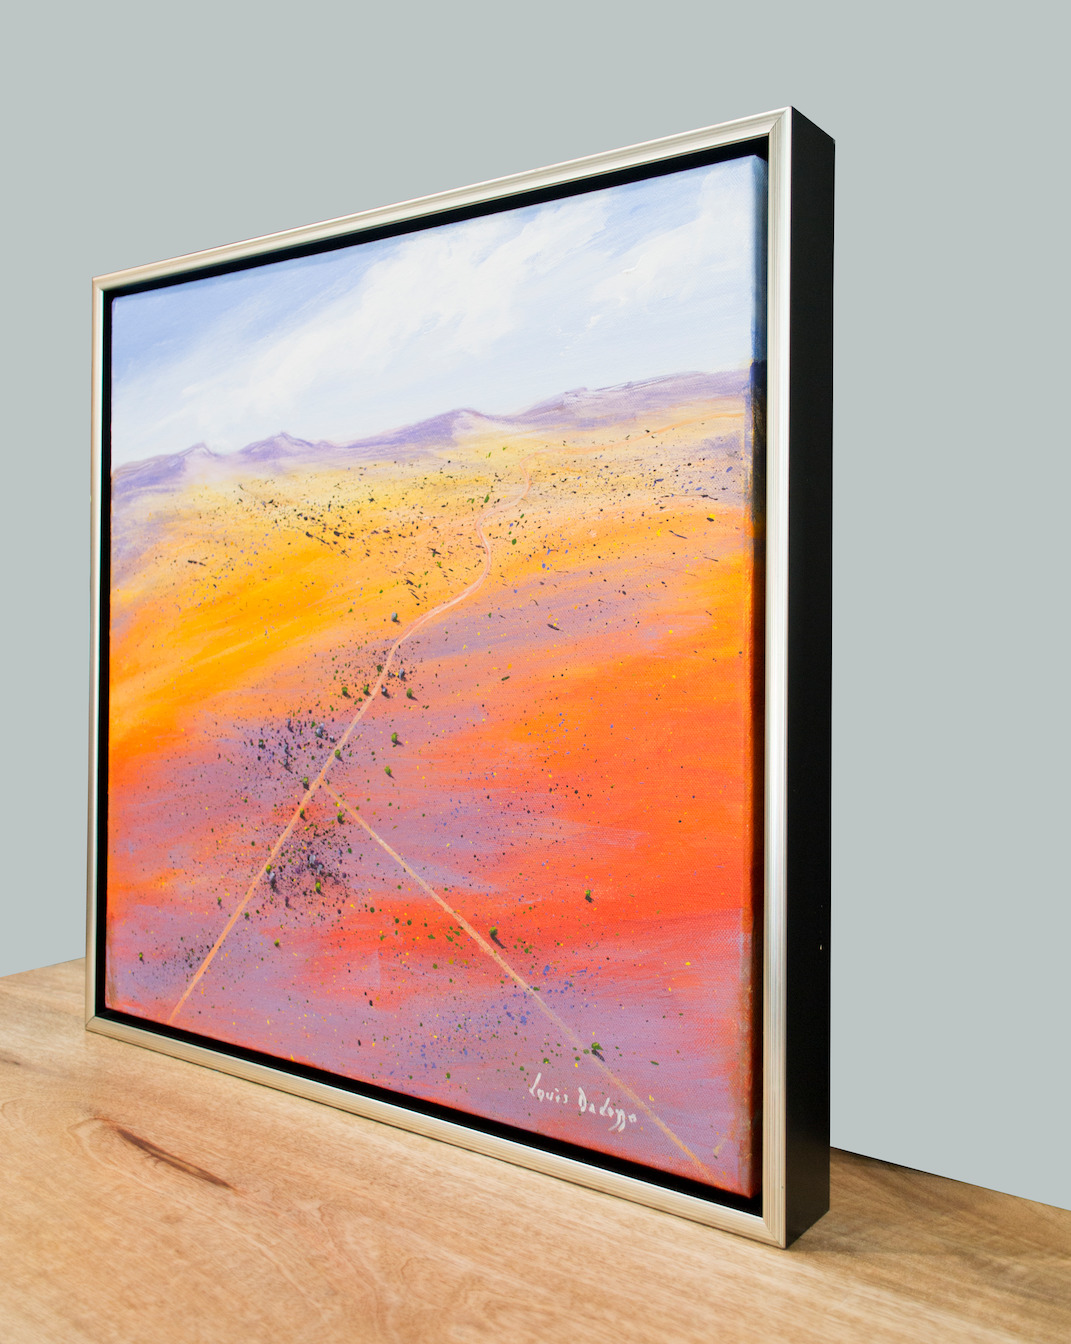 Framed Side View Of Landscape Painting "Towards The Breakaways Study" By Louis Dalozzo